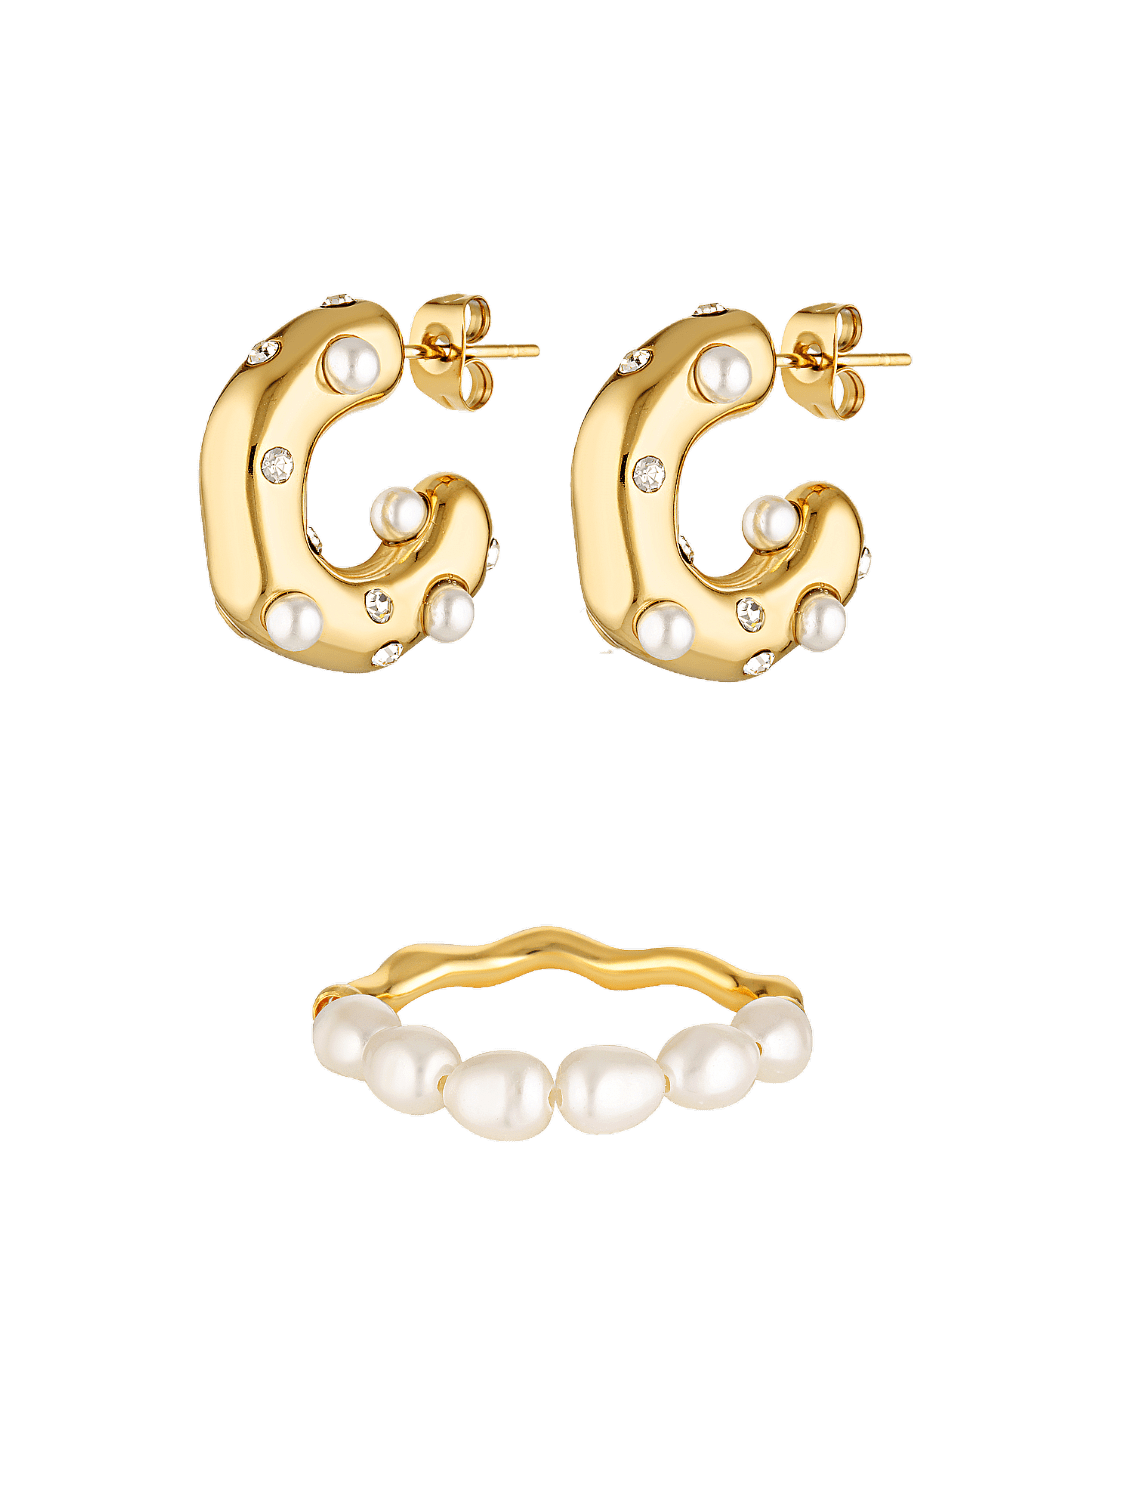 Pearl studded gold hoops and a pearl ring gift set